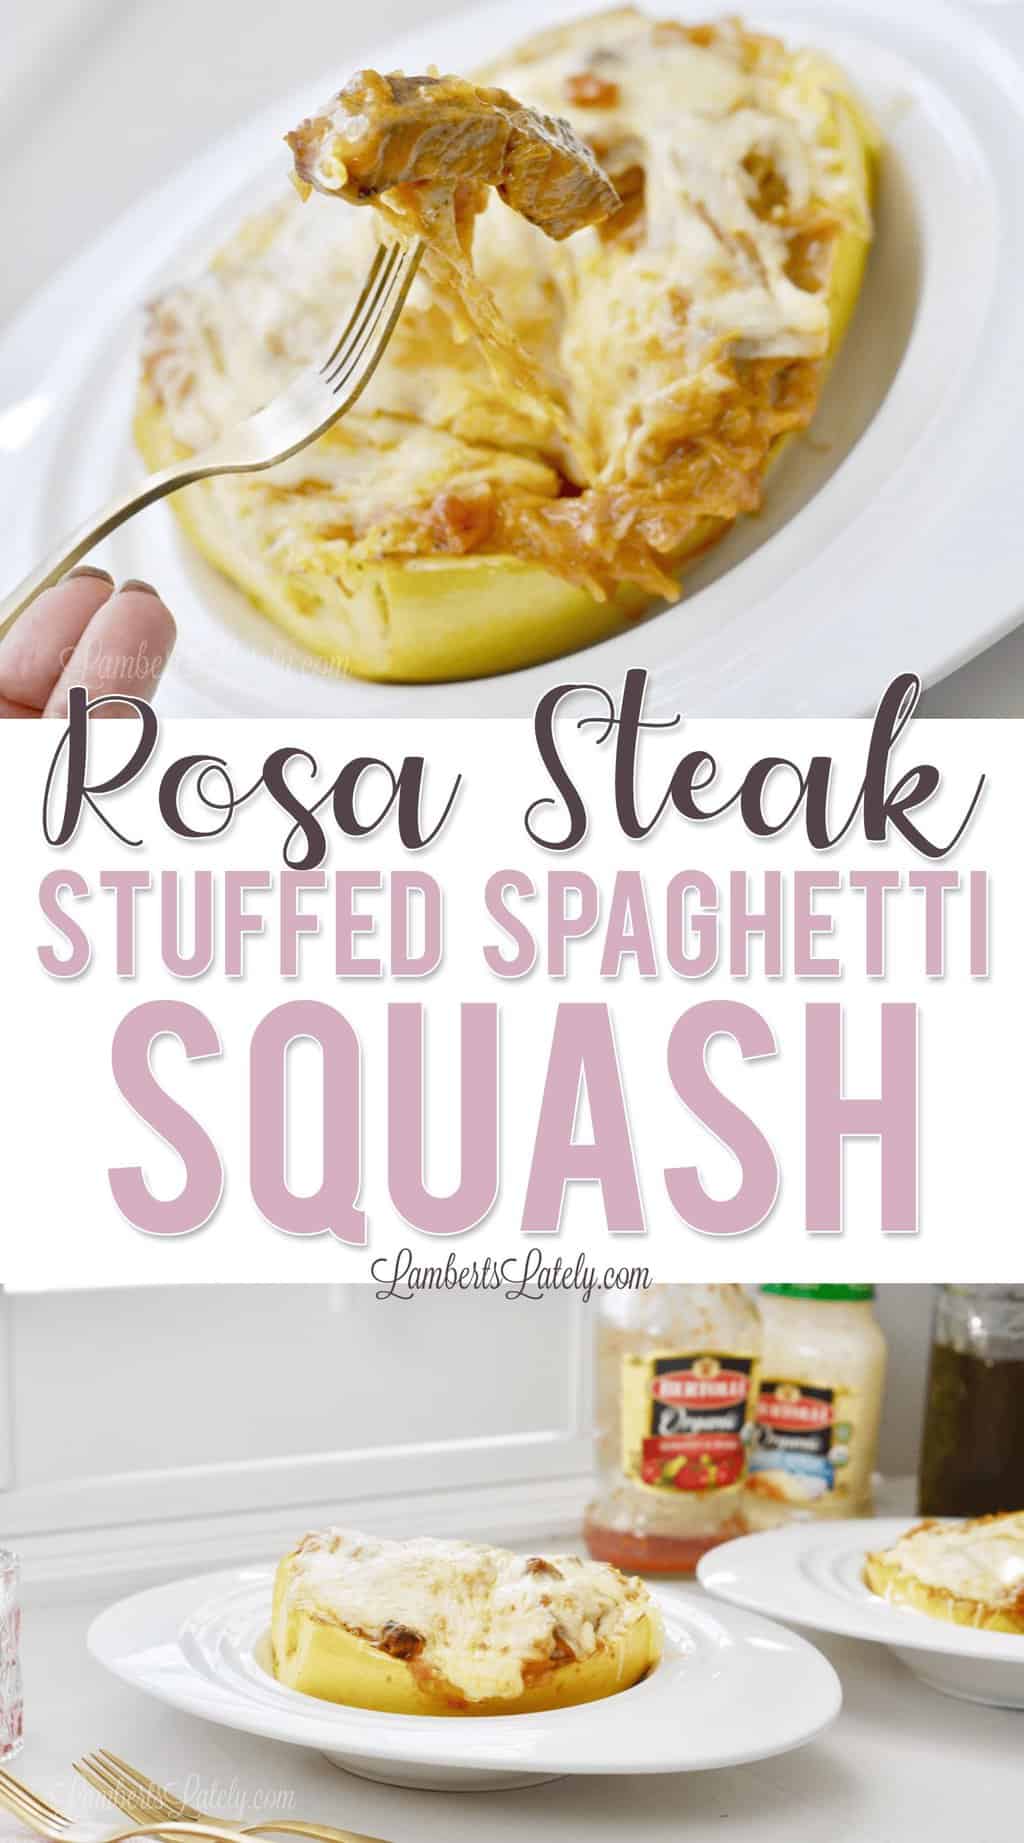 A mixture of baked spaghetti squash stuffed with sirloin steak and a rich rosa sauce (combination of alfredo and tomato/basil) makes for a delicious at home date night dish!